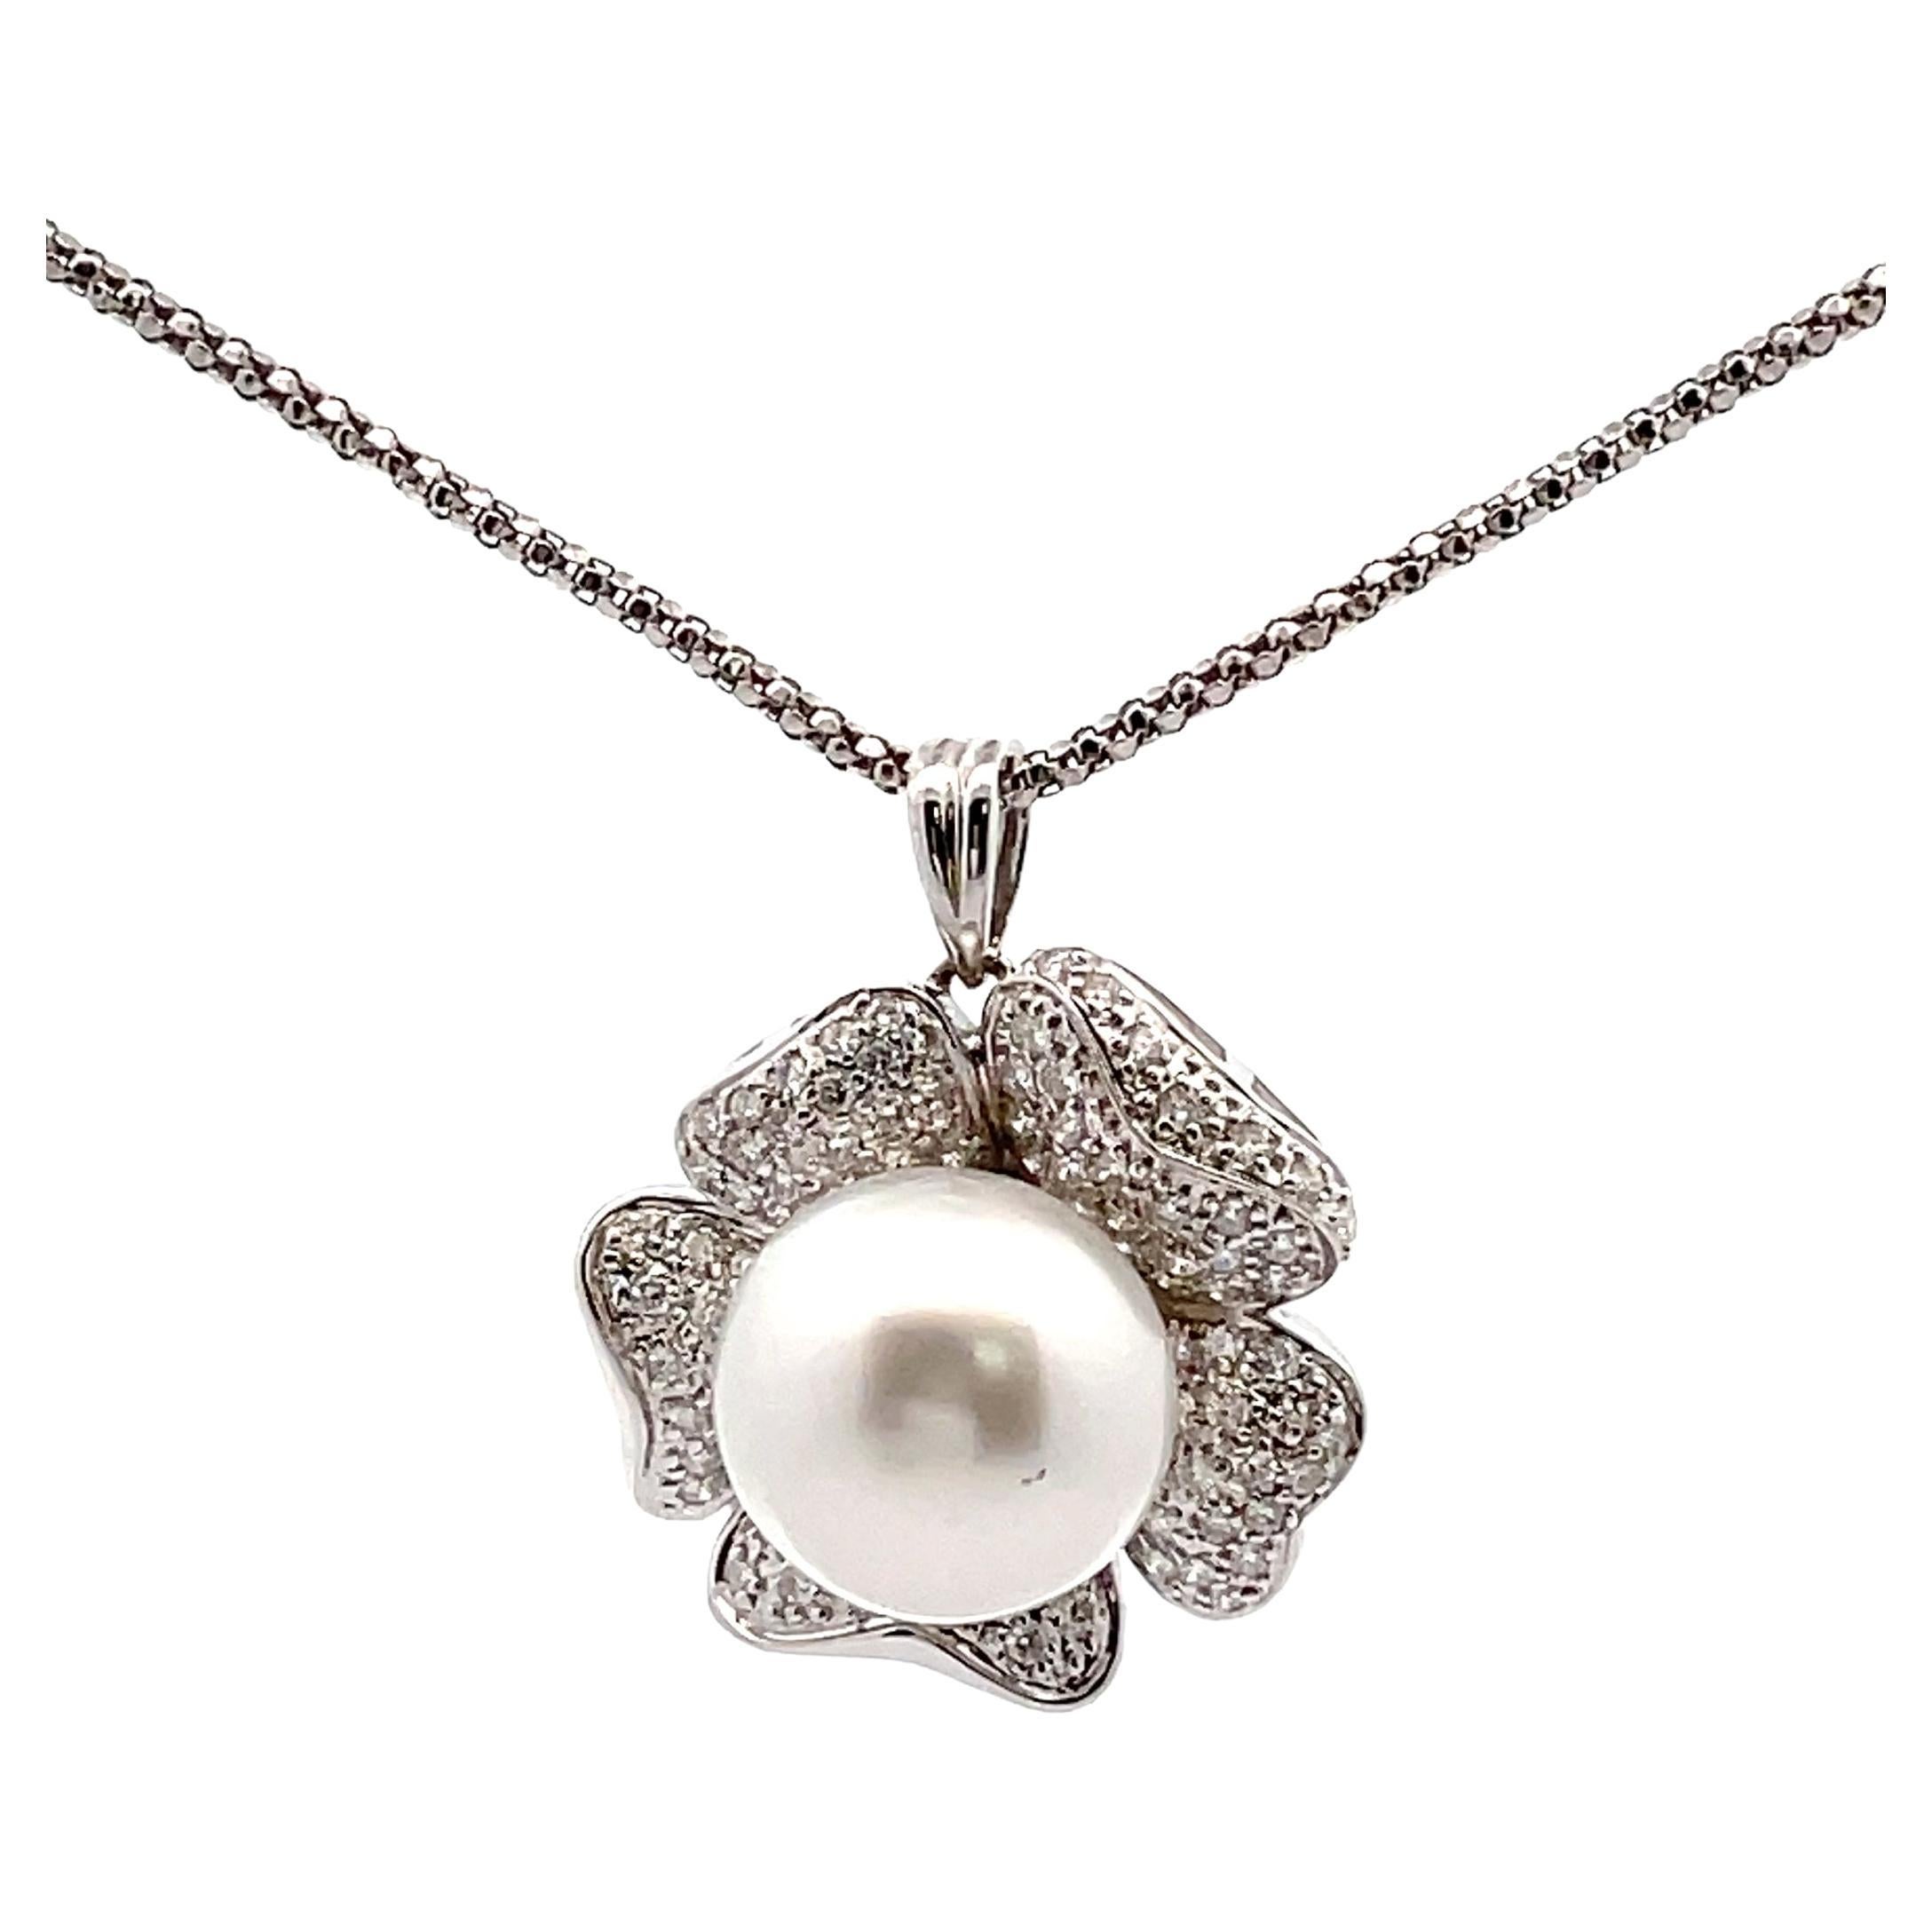 White Gold Flower Pendant Necklace with South Sea Pearl